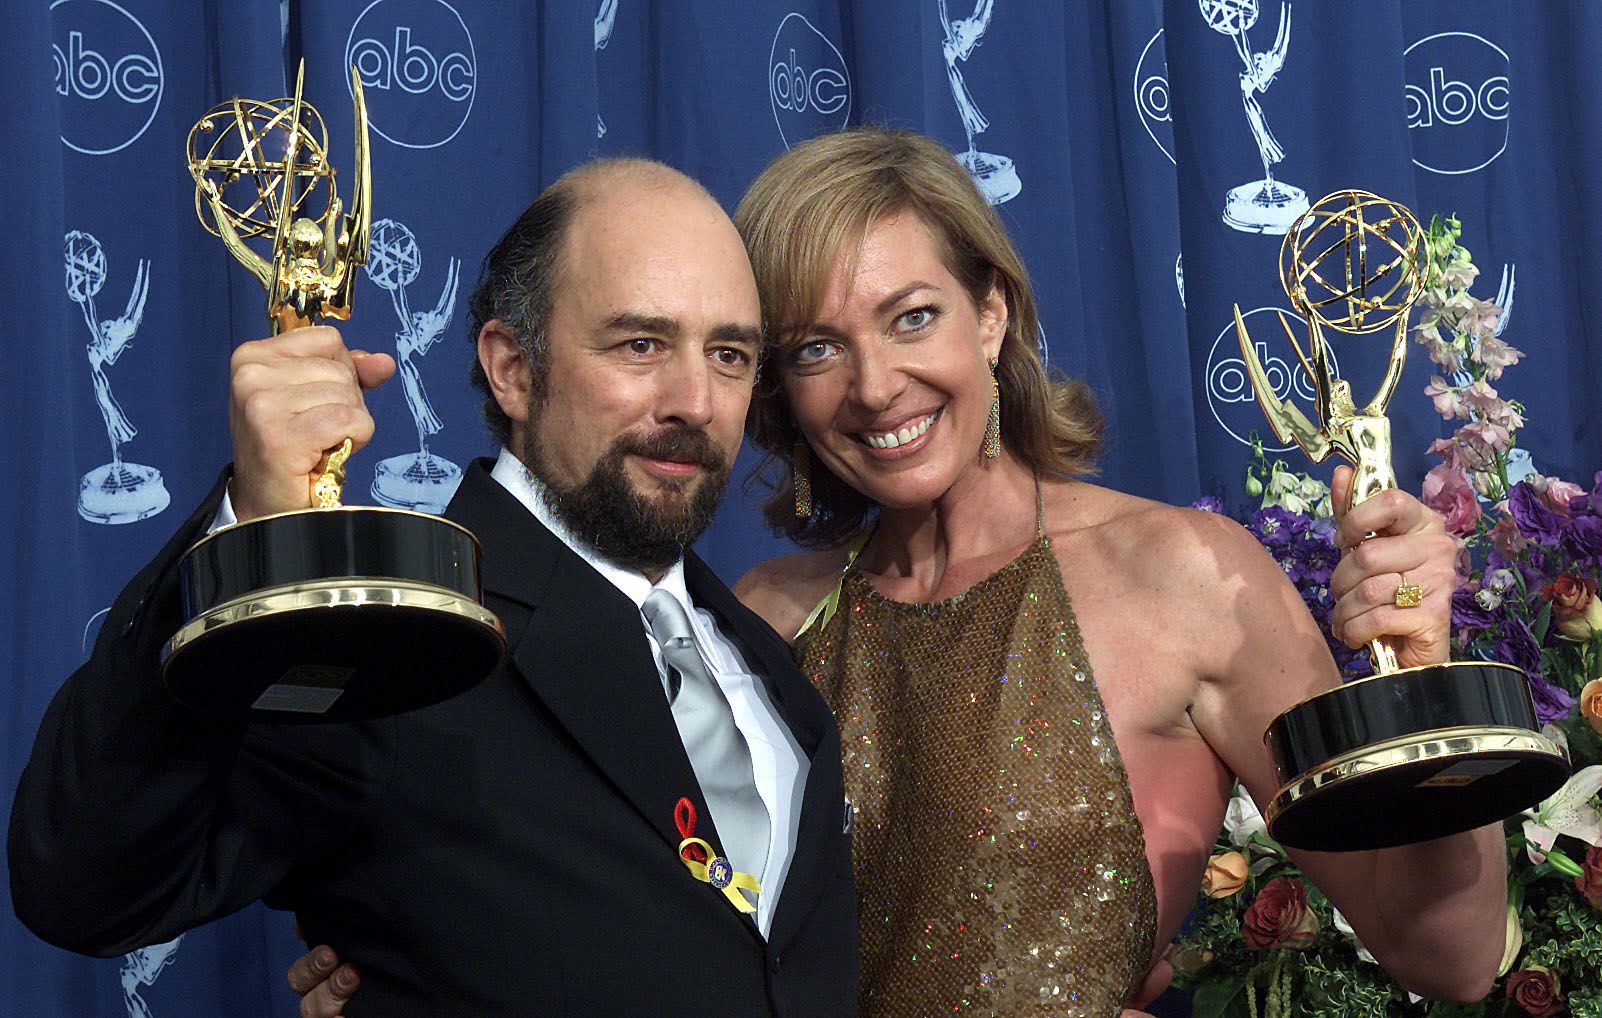 Richard Schiff (left) with his Primetime Emmy award in 2001.